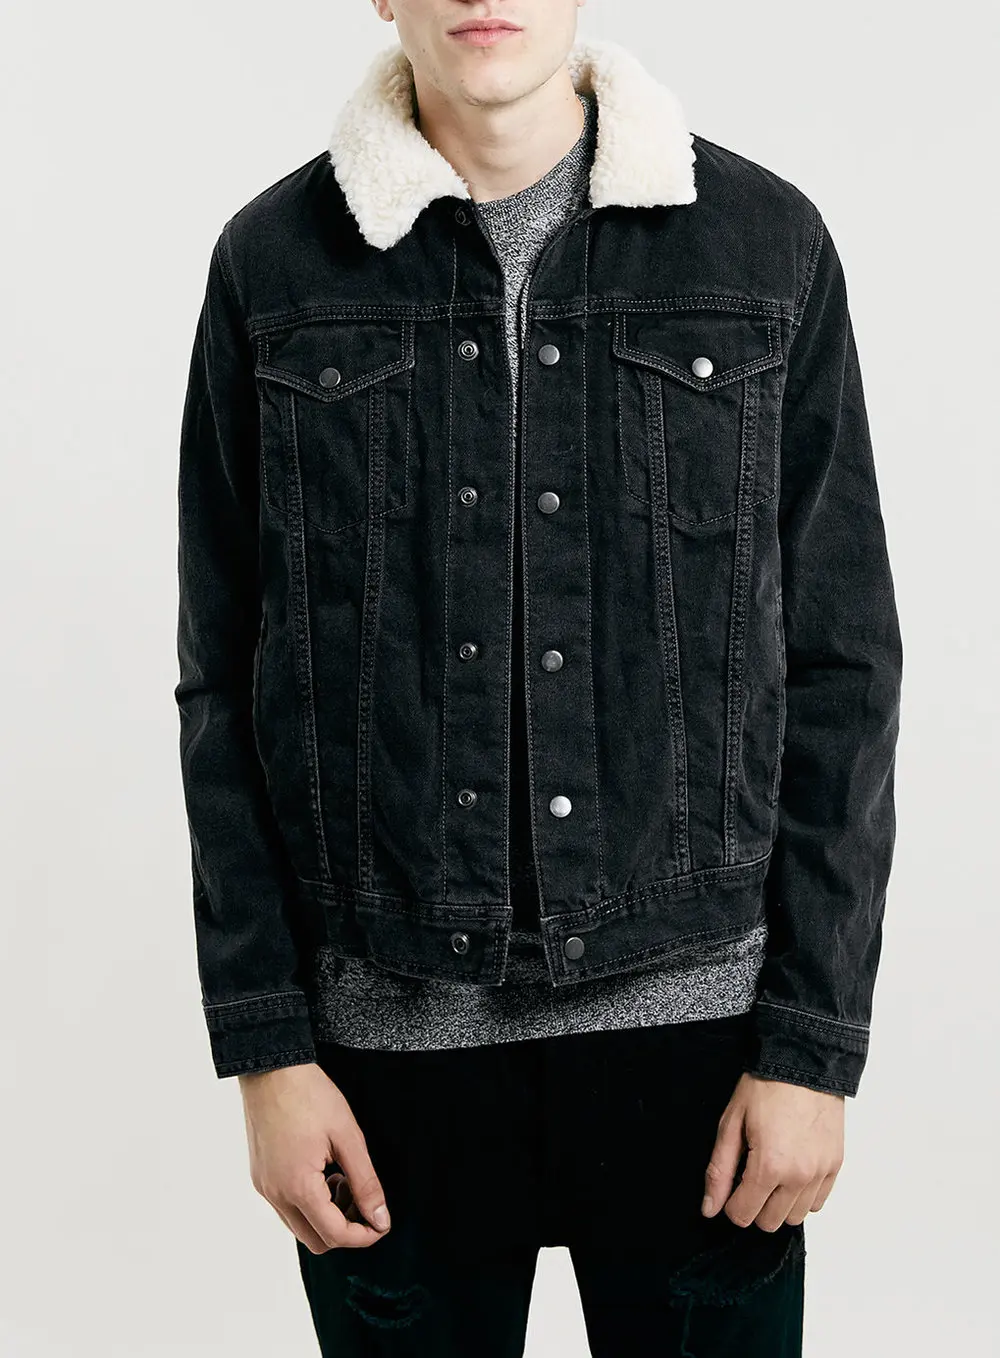 blue jean jacket with fur collar